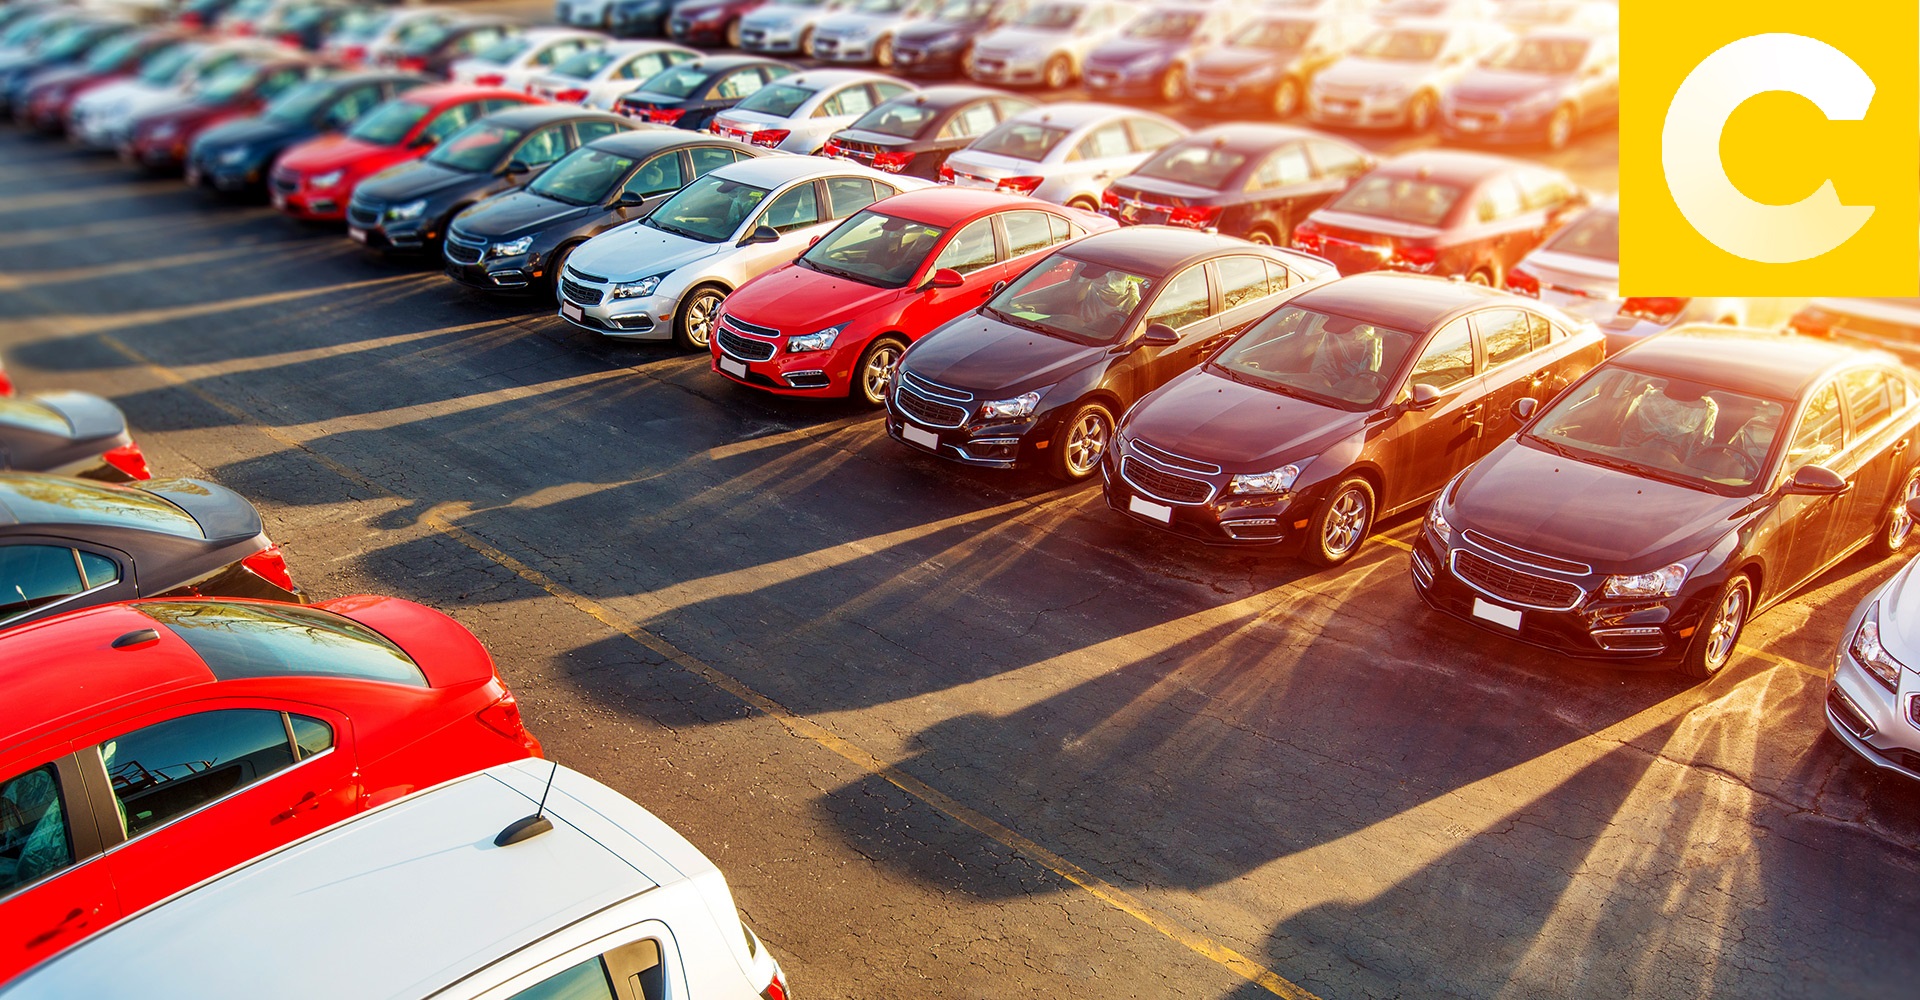 Why Car Yards Are Trustworthy Sources For Pre-Owned Vehicles?